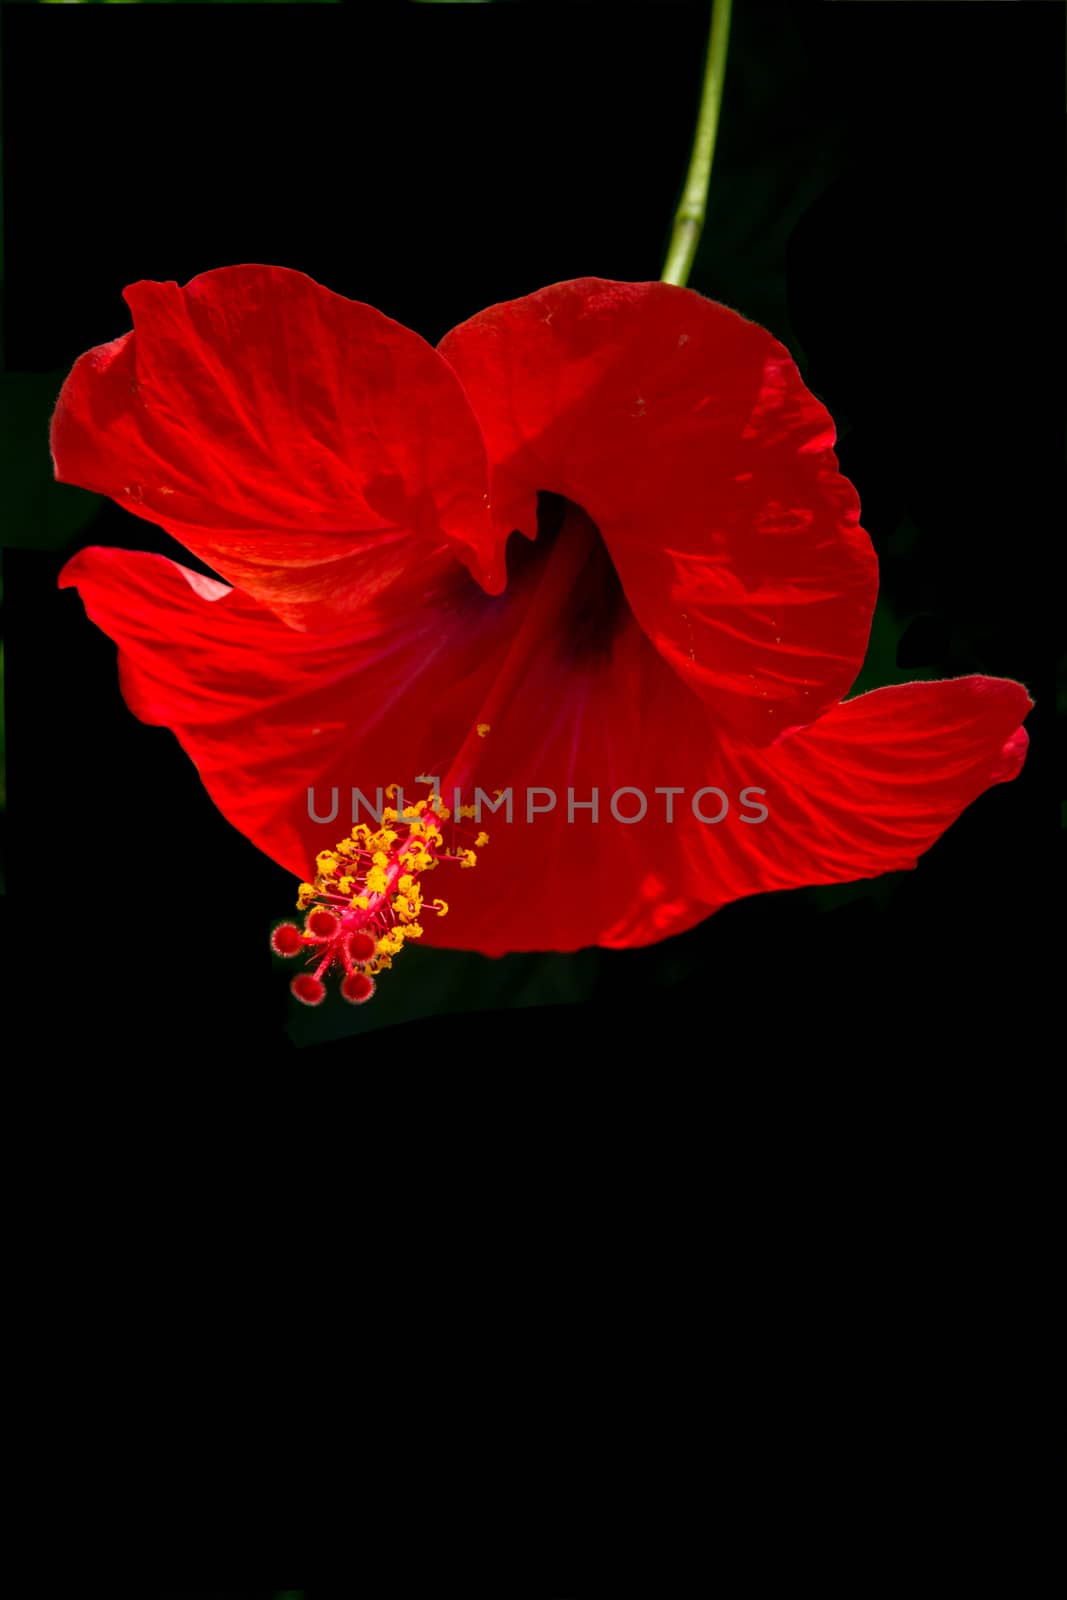 Red hibiscus flower with green stem and yellow petals isolated on black.